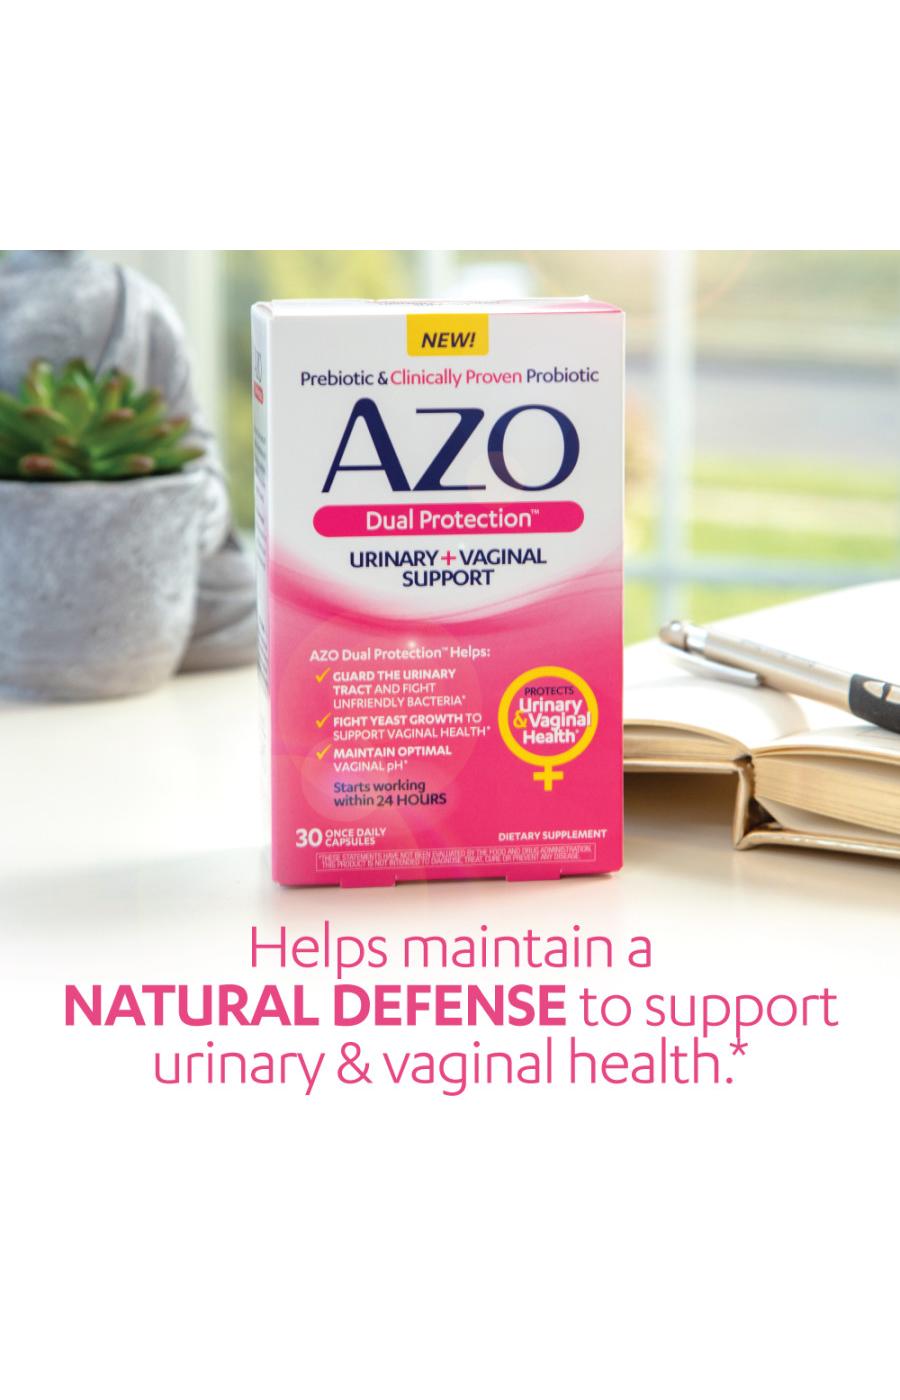 Azo Dual Protection Probiotic; image 5 of 8